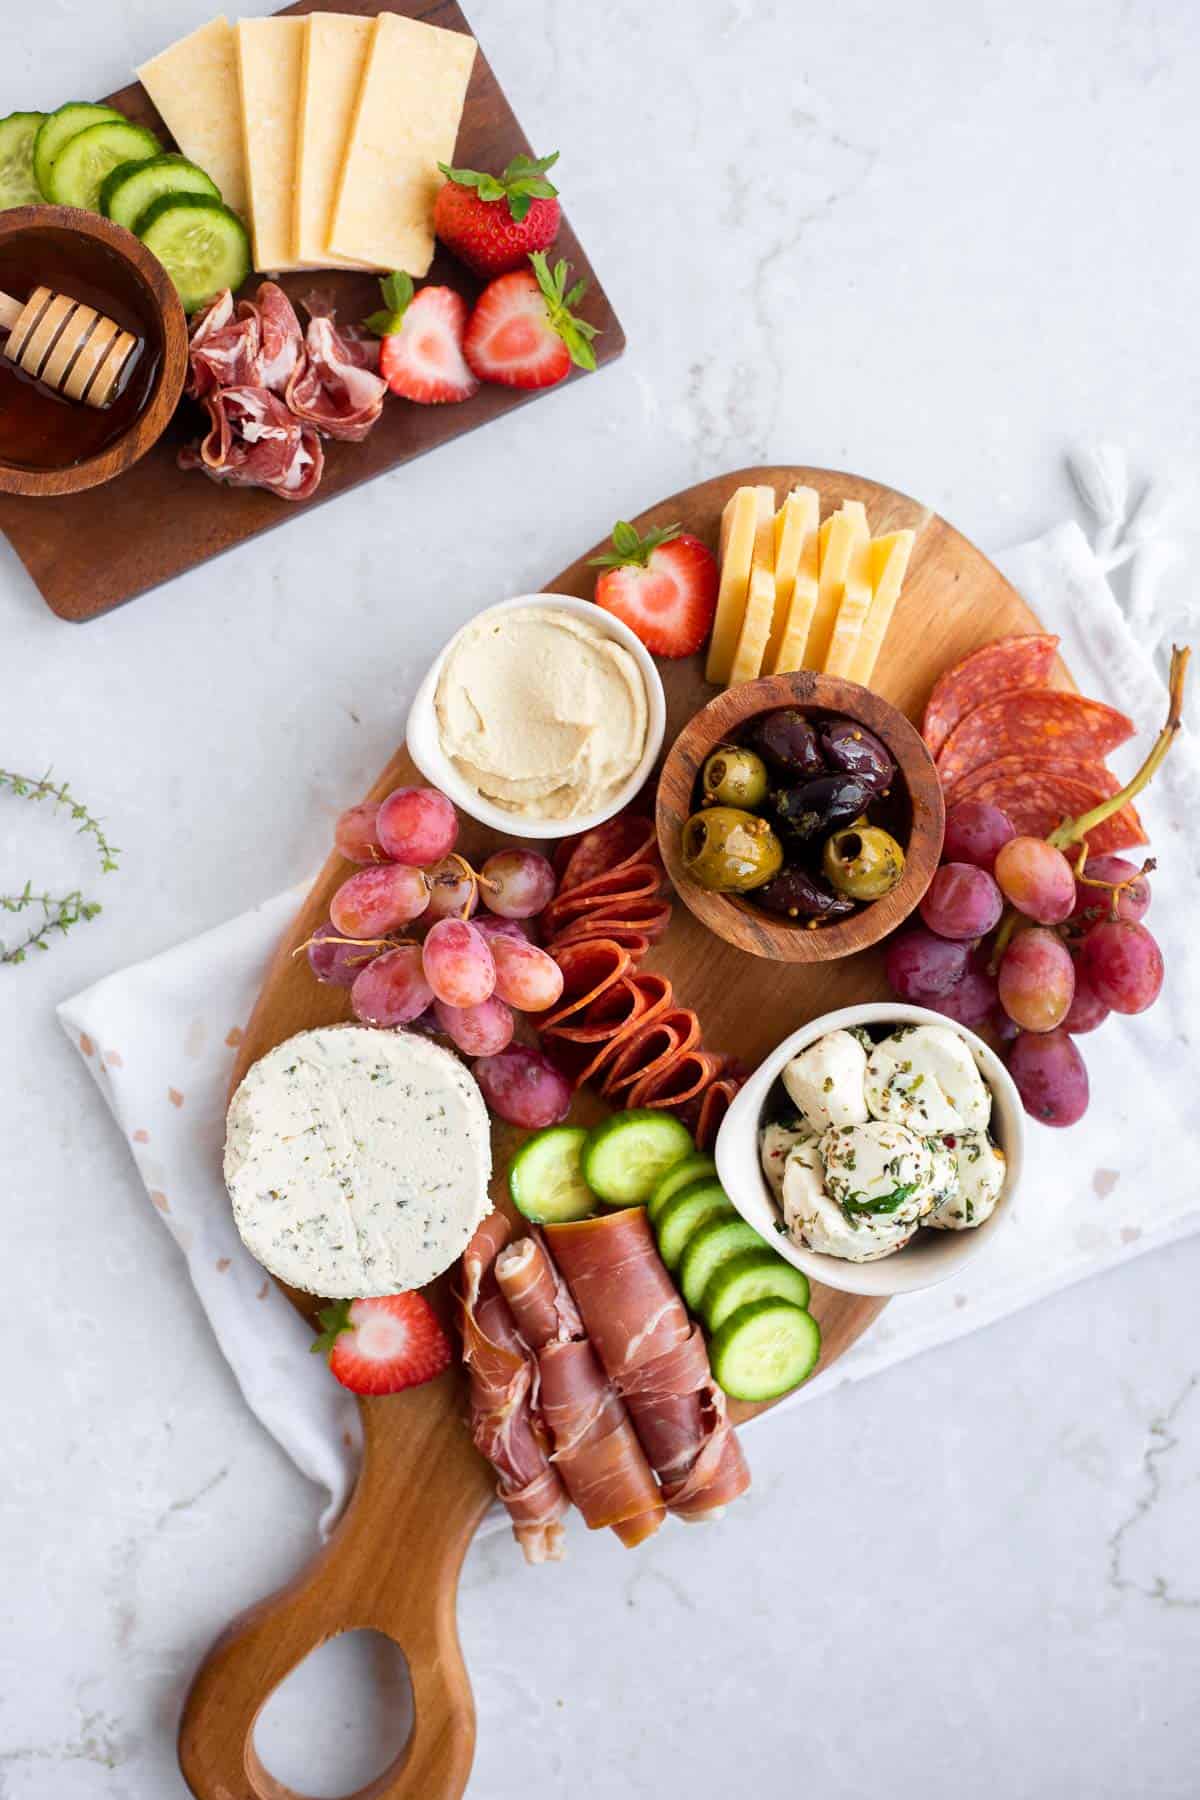 fruit and veggies added to a small cheese board.